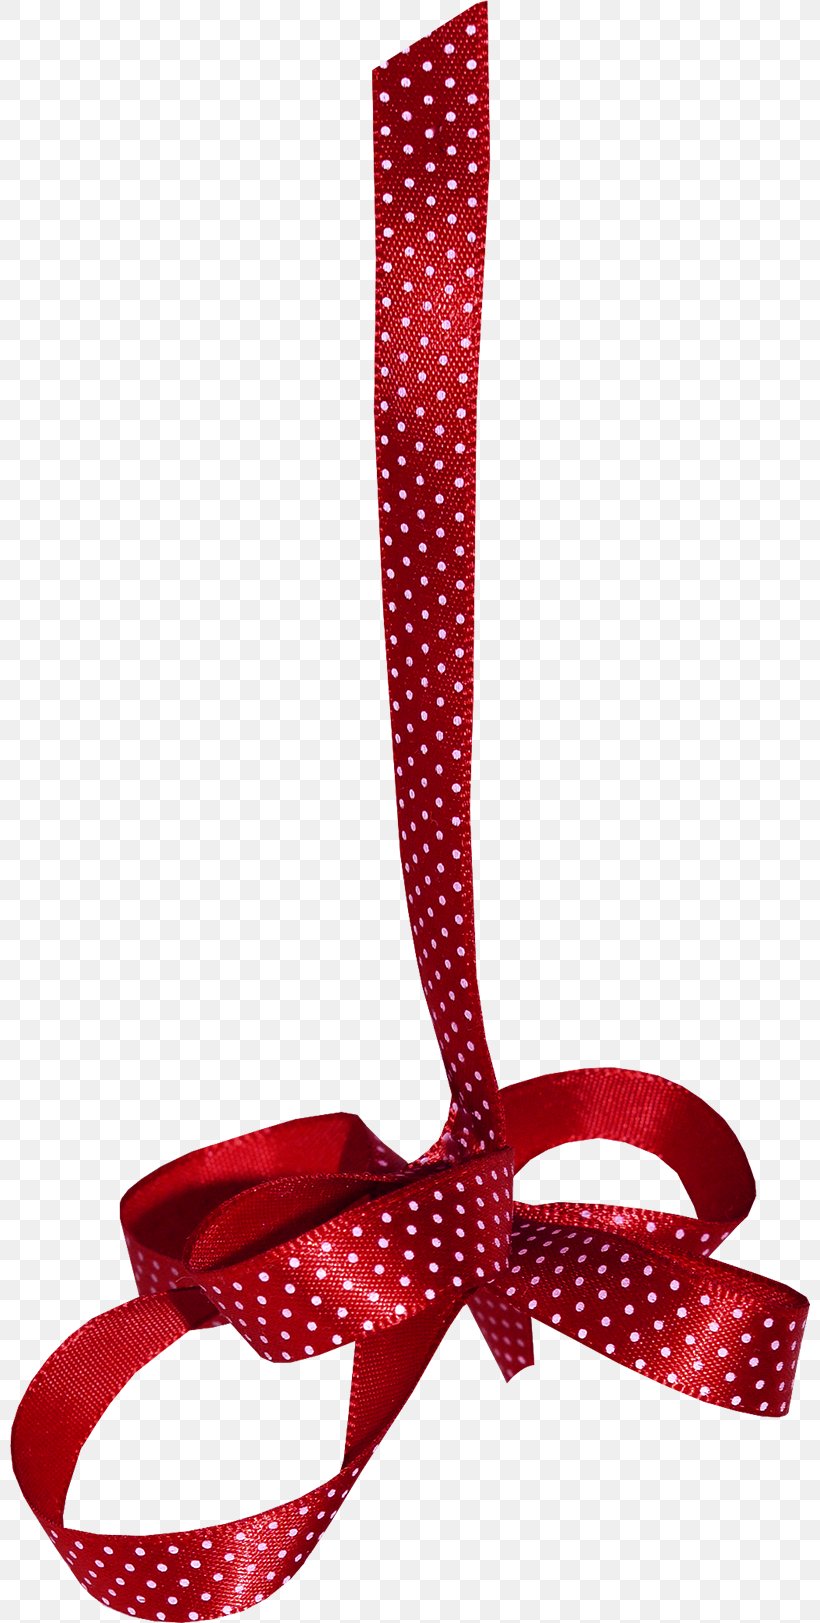 Ribbon Shoelace Knot Clip Art, PNG, 800x1623px, Ribbon, Bow Tie, Christmas, Gift, Information Download Free